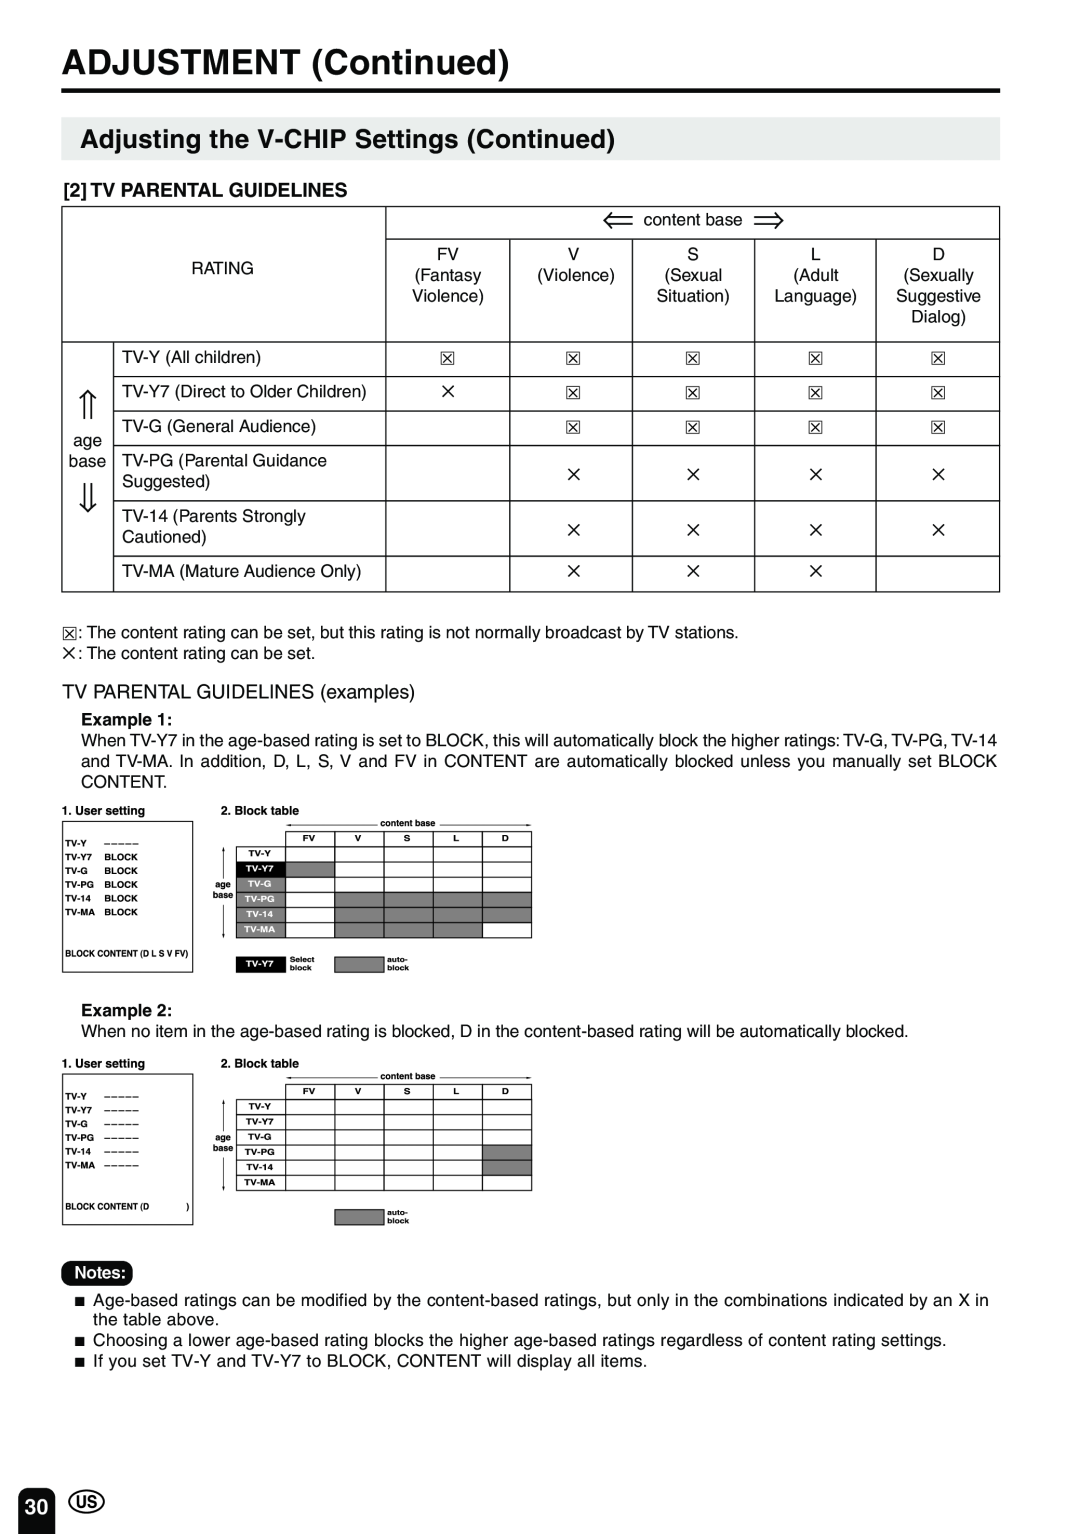 Sharp LC-20B2UA Adjusting the V-CHIP Settings Continued, Tv Parental Guidelines, ADJUSTMENT Continued, Example 